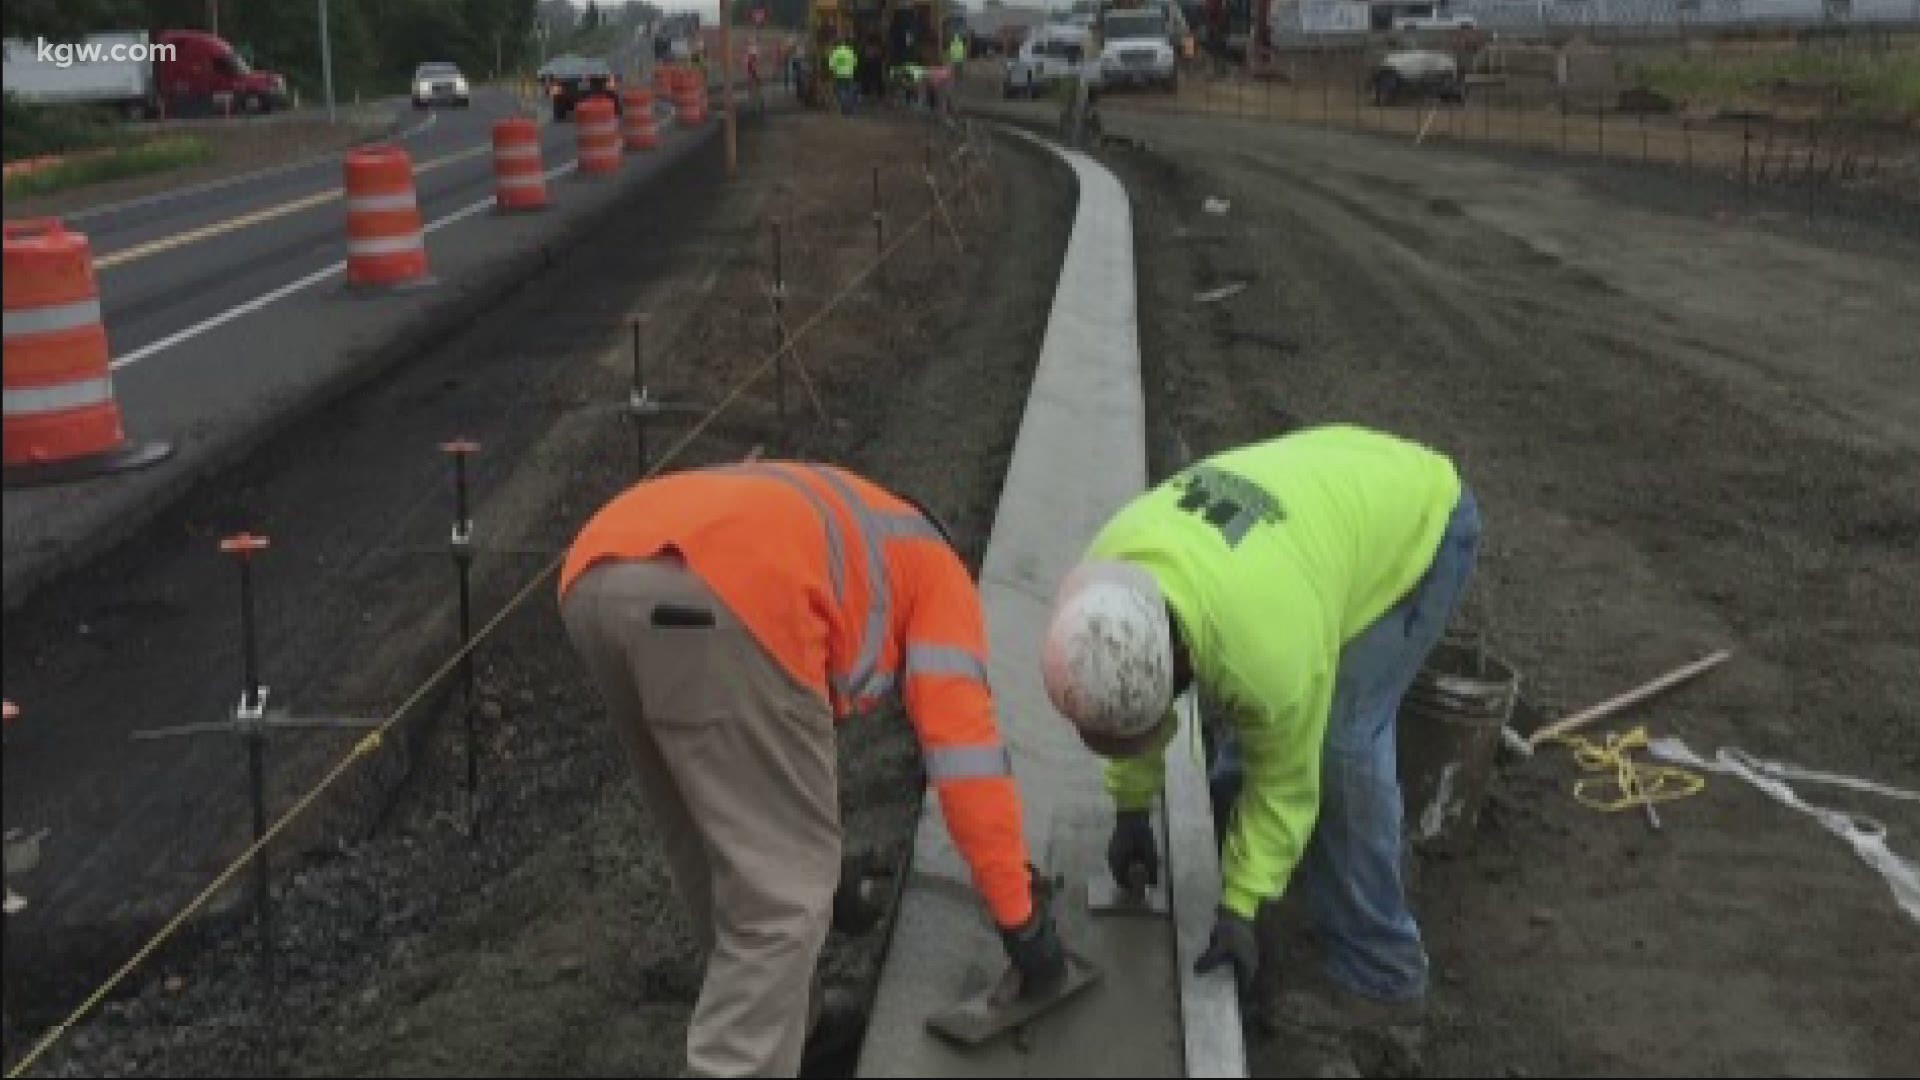 The Washington department of transportation wants to hear from you about road projects that impact your commute. The feedback has been more challenging to get right